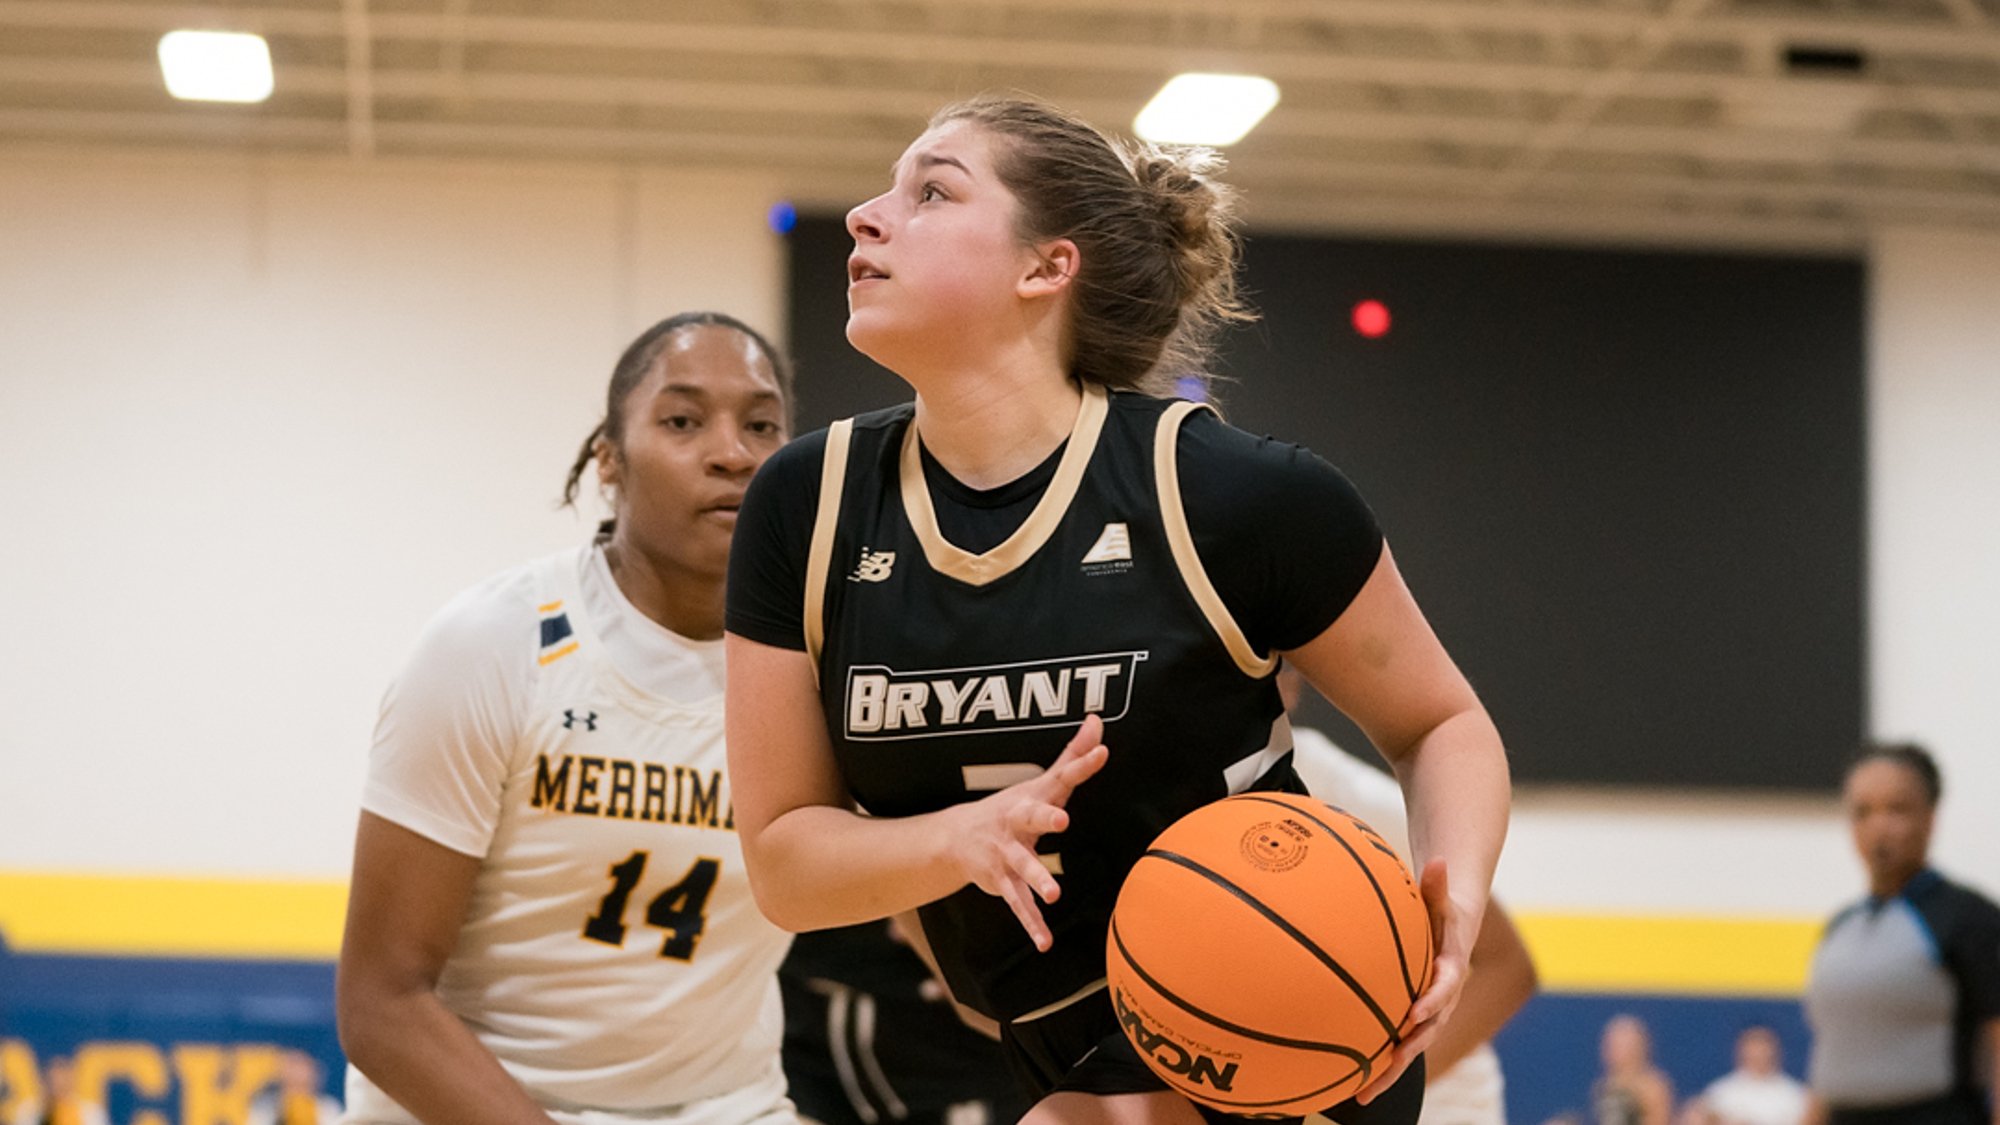 Bryant loses to FIU on Friday